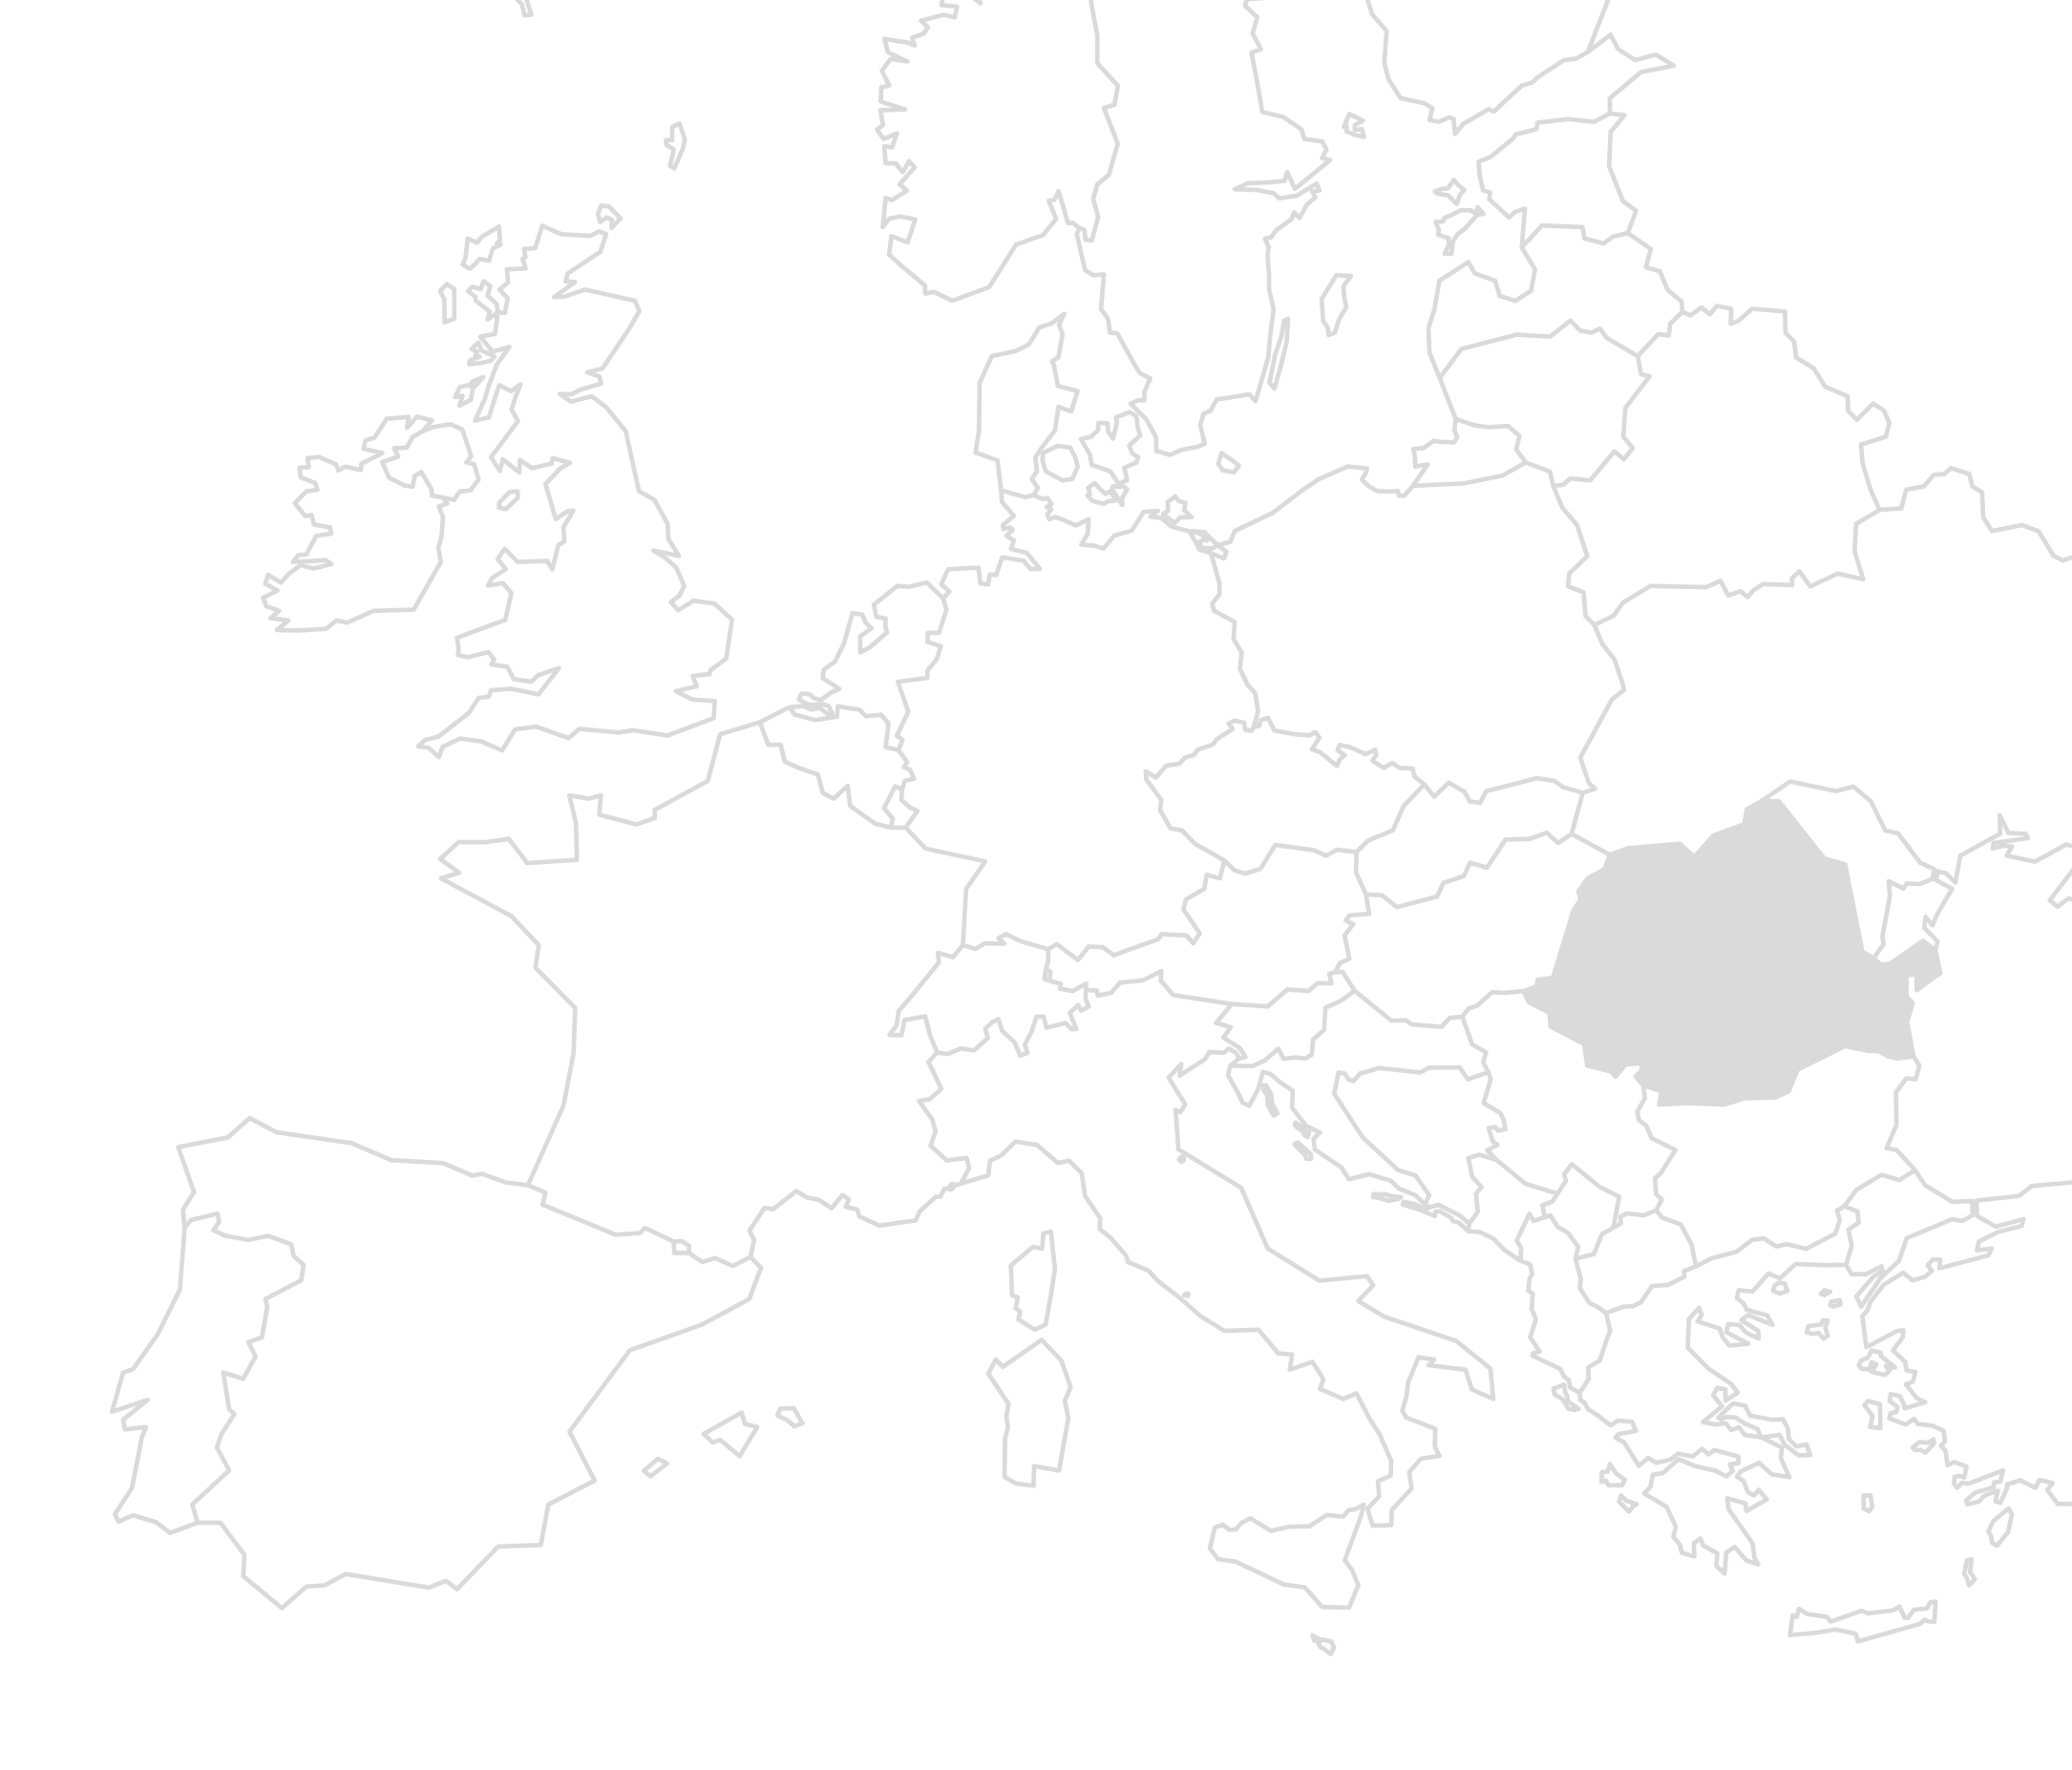 Map of Europe in grayscale, with Romania highlighted in darker gray.